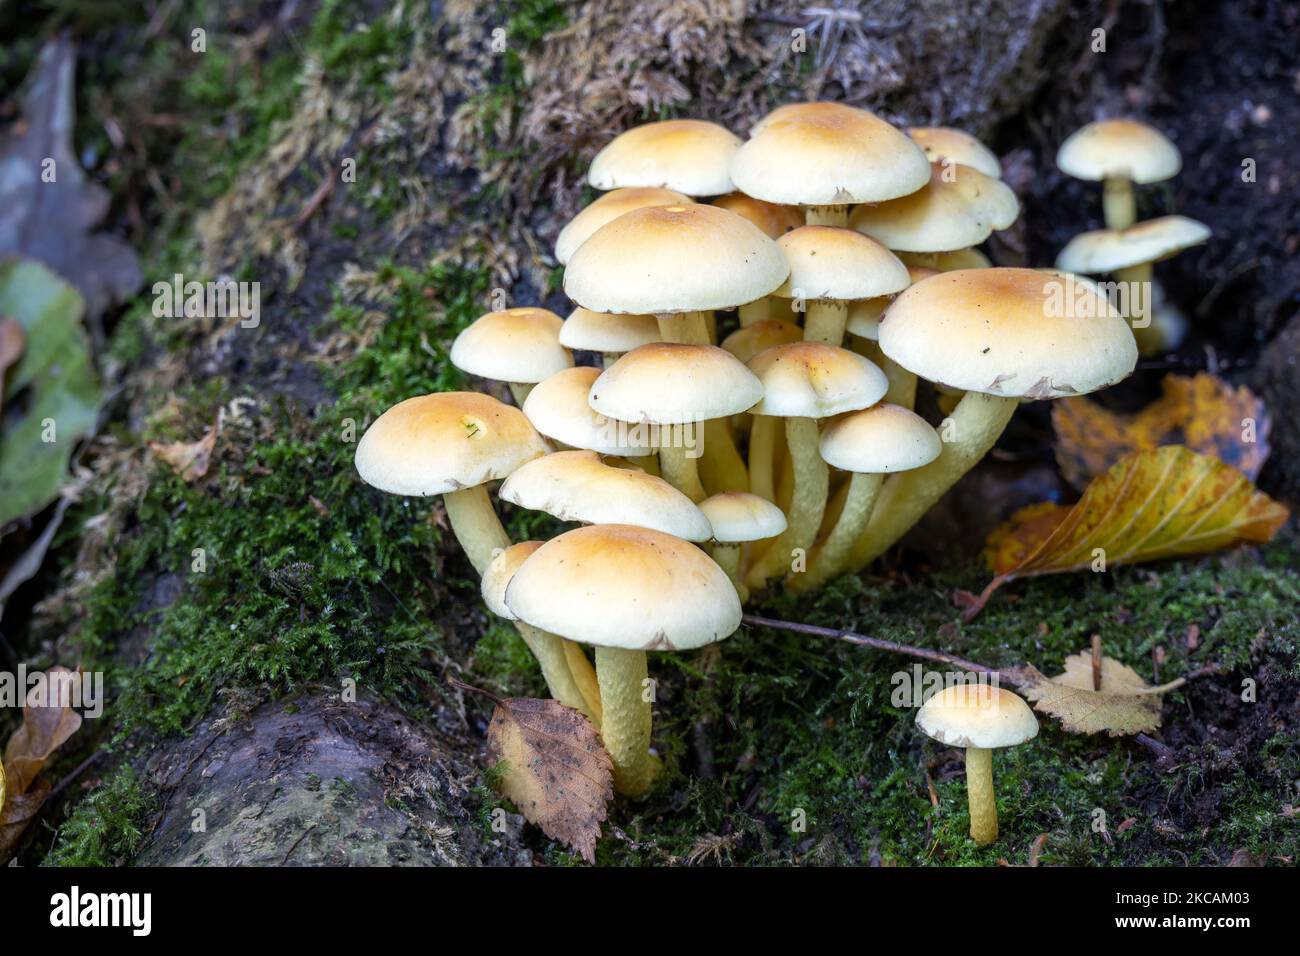 Mushrooms or toadstools on a tree stump in autumn, close up Stock Photo